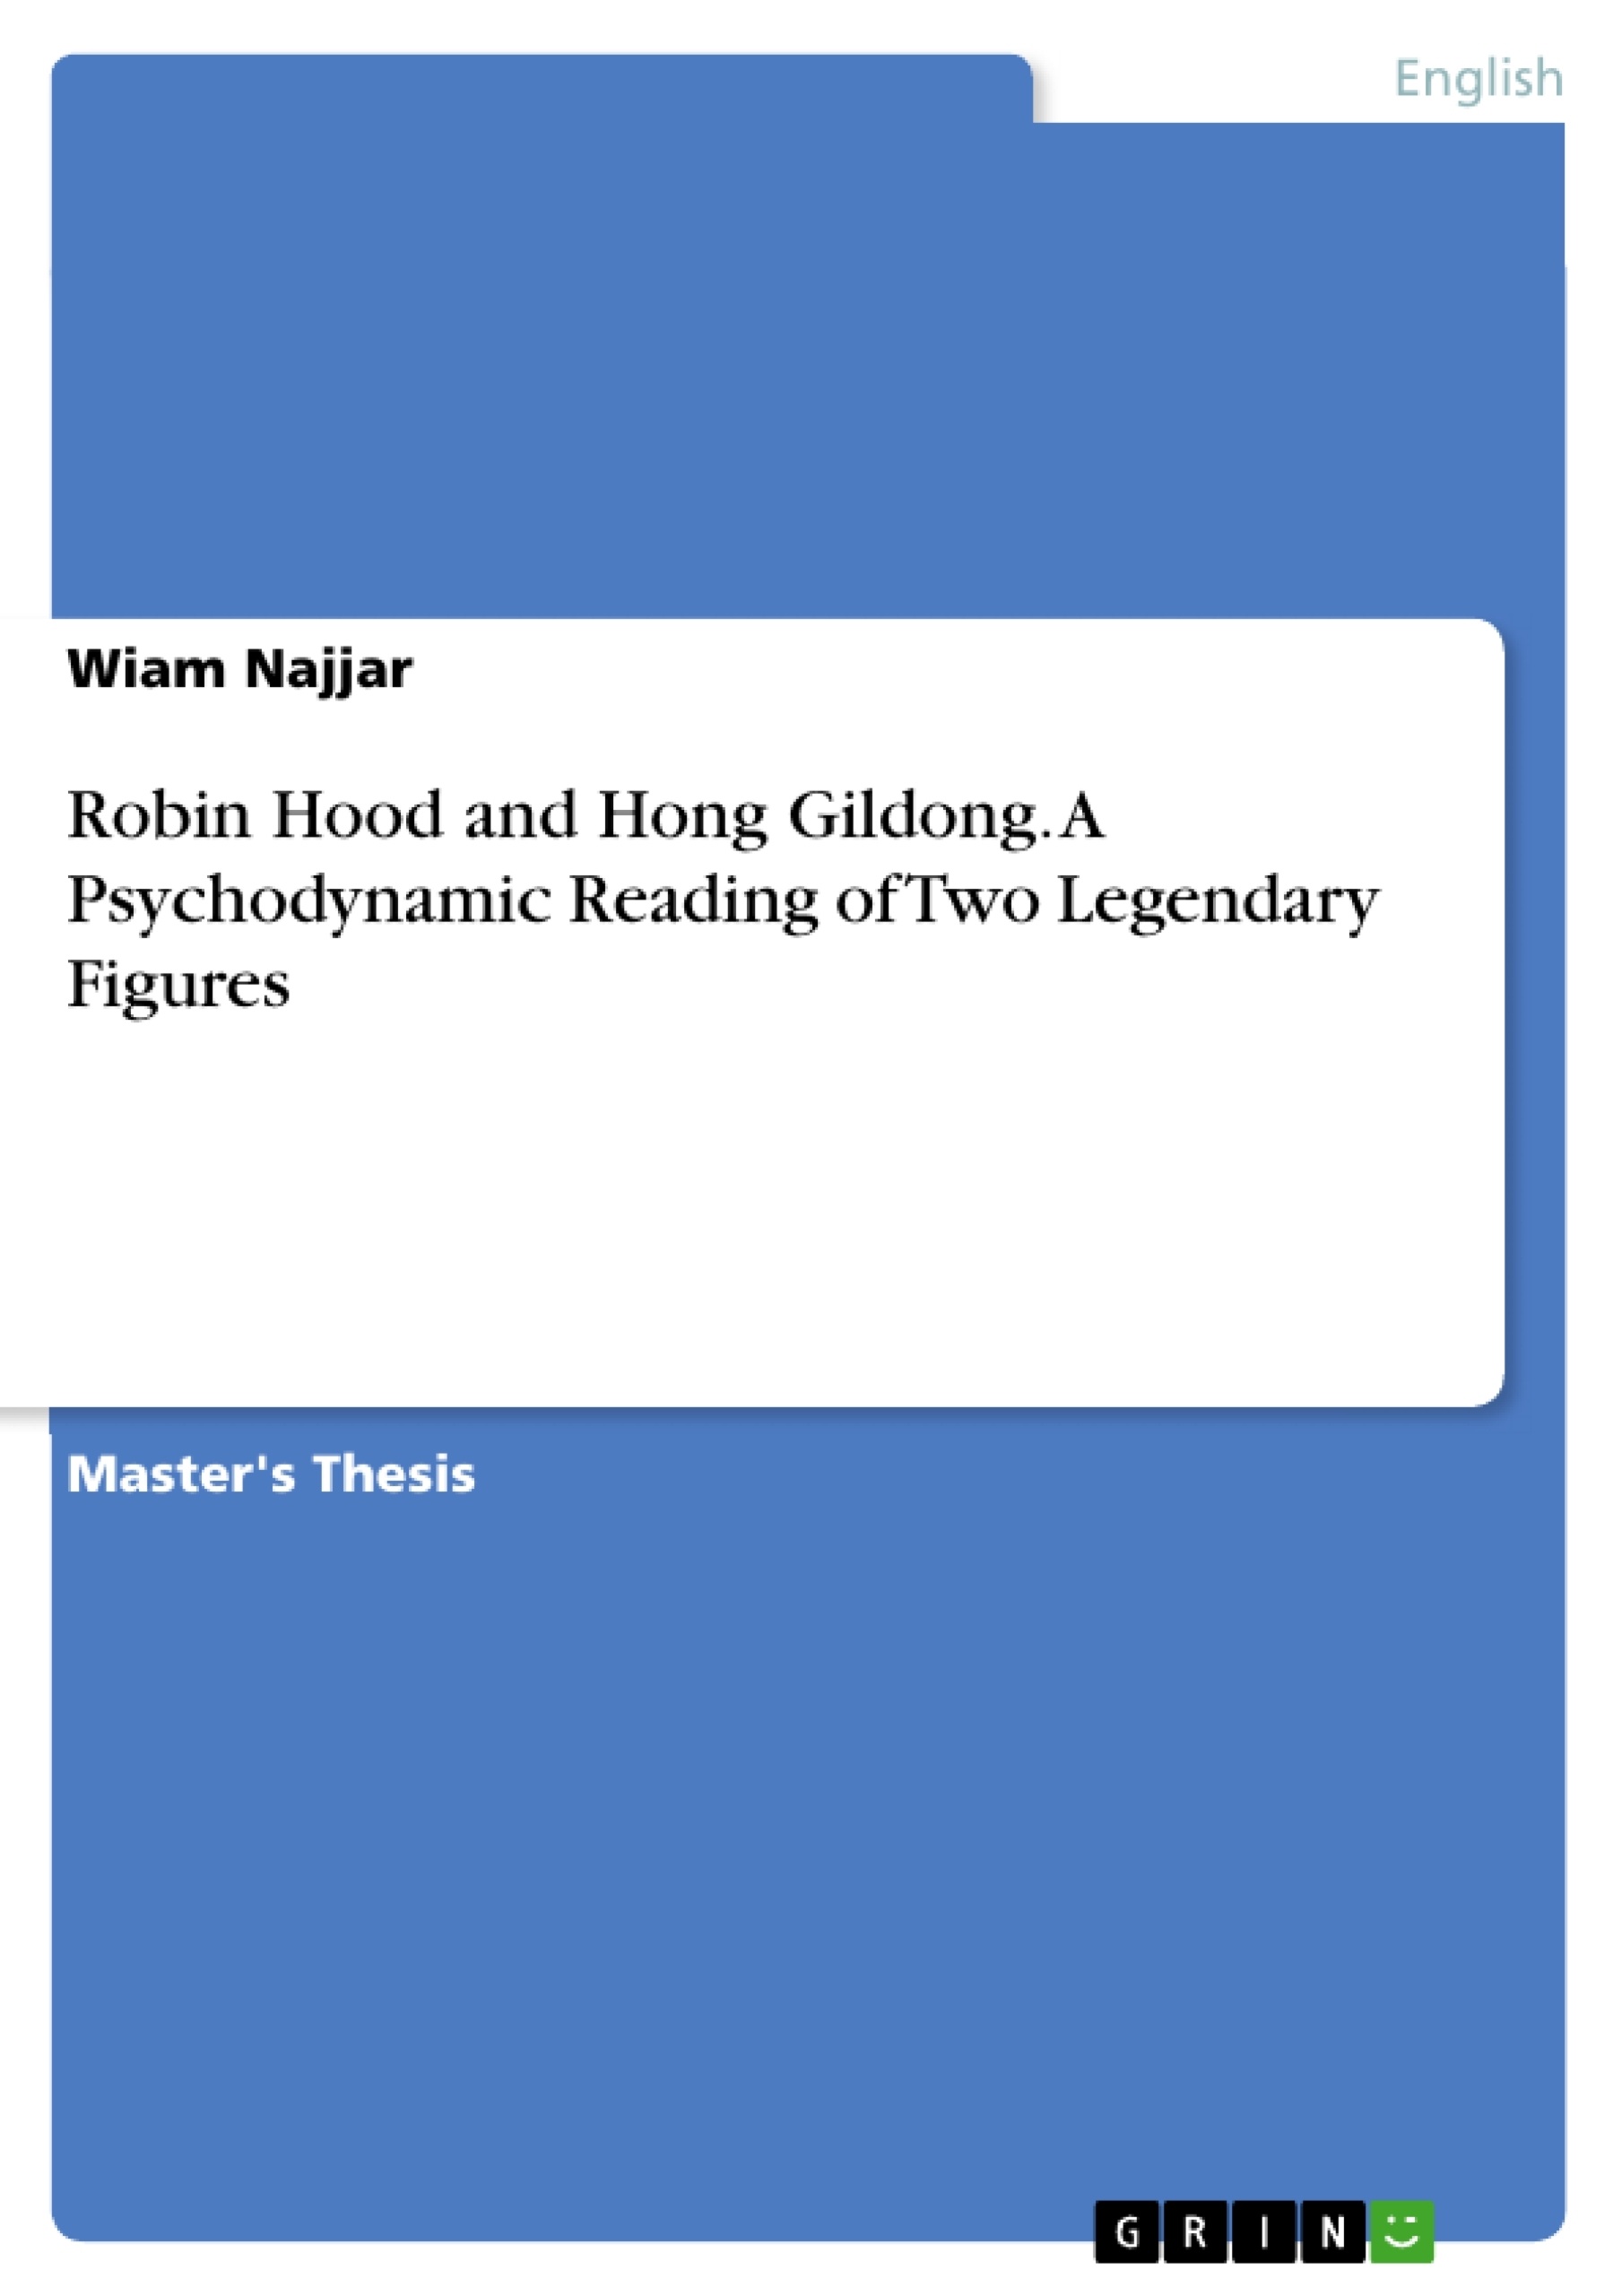 Titre: Robin Hood and Hong Gildong. A Psychodynamic Reading of Two Legendary Figures